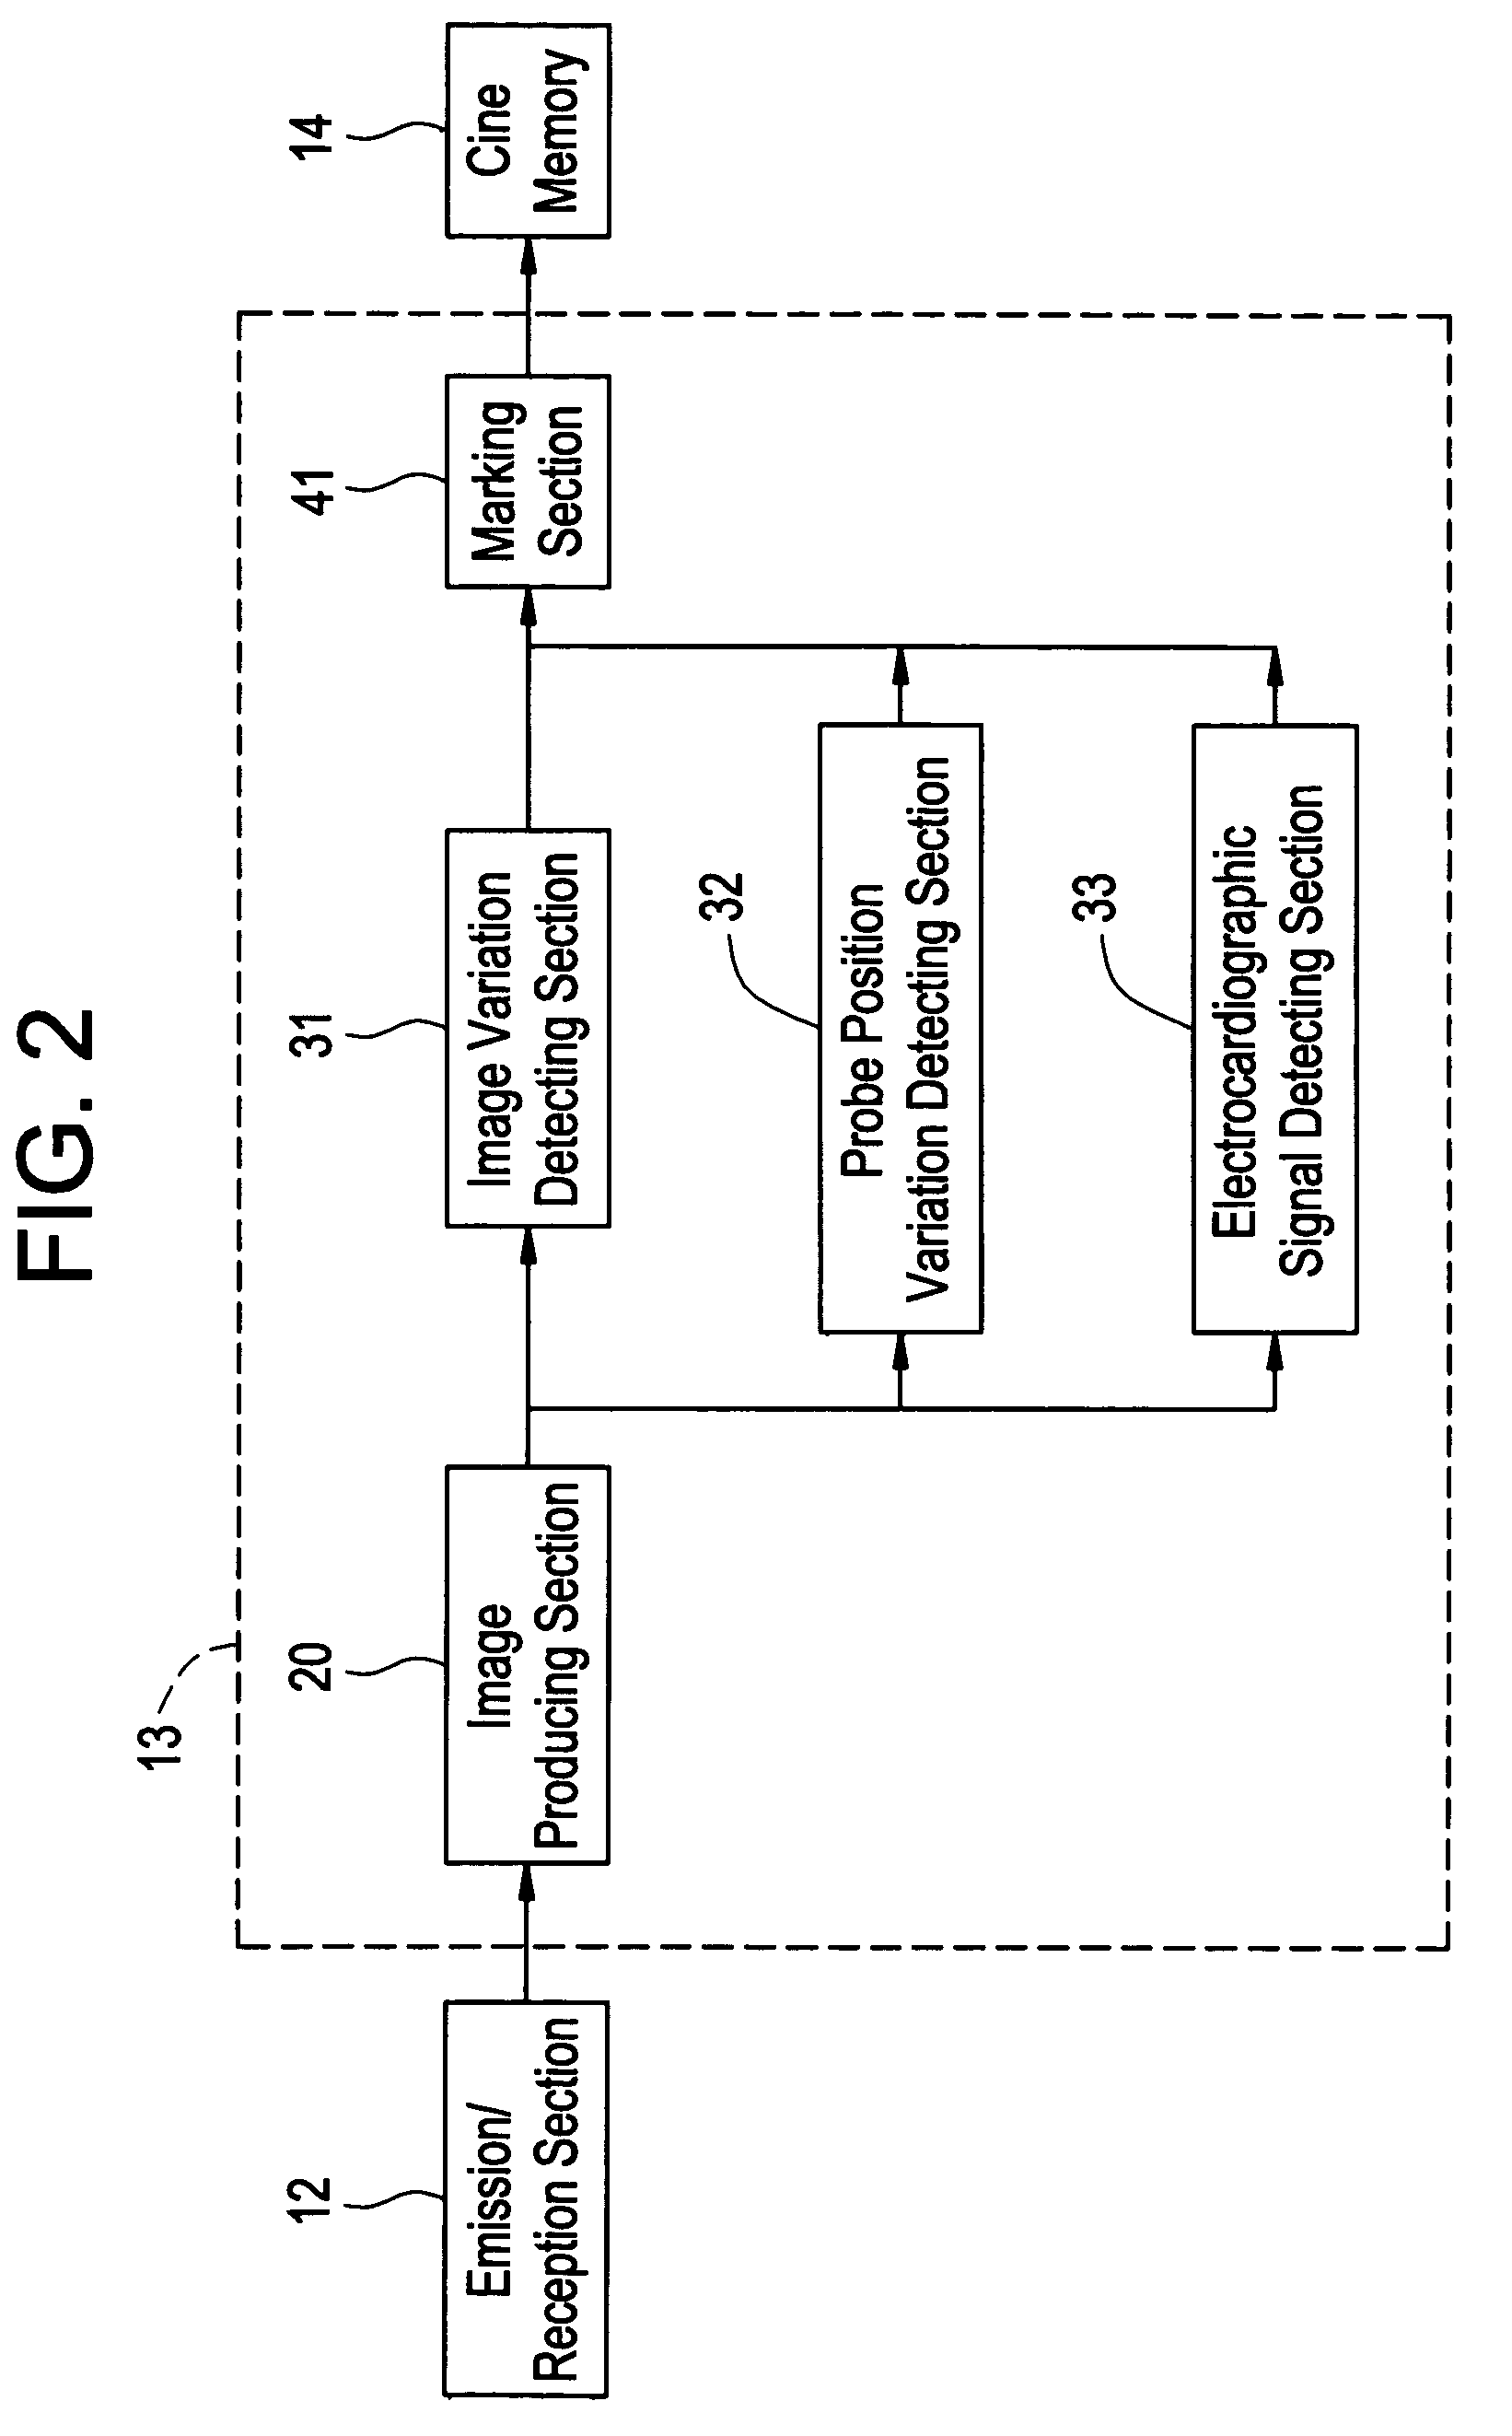 Ultrasonic diagnostic apparatus with automatic marking